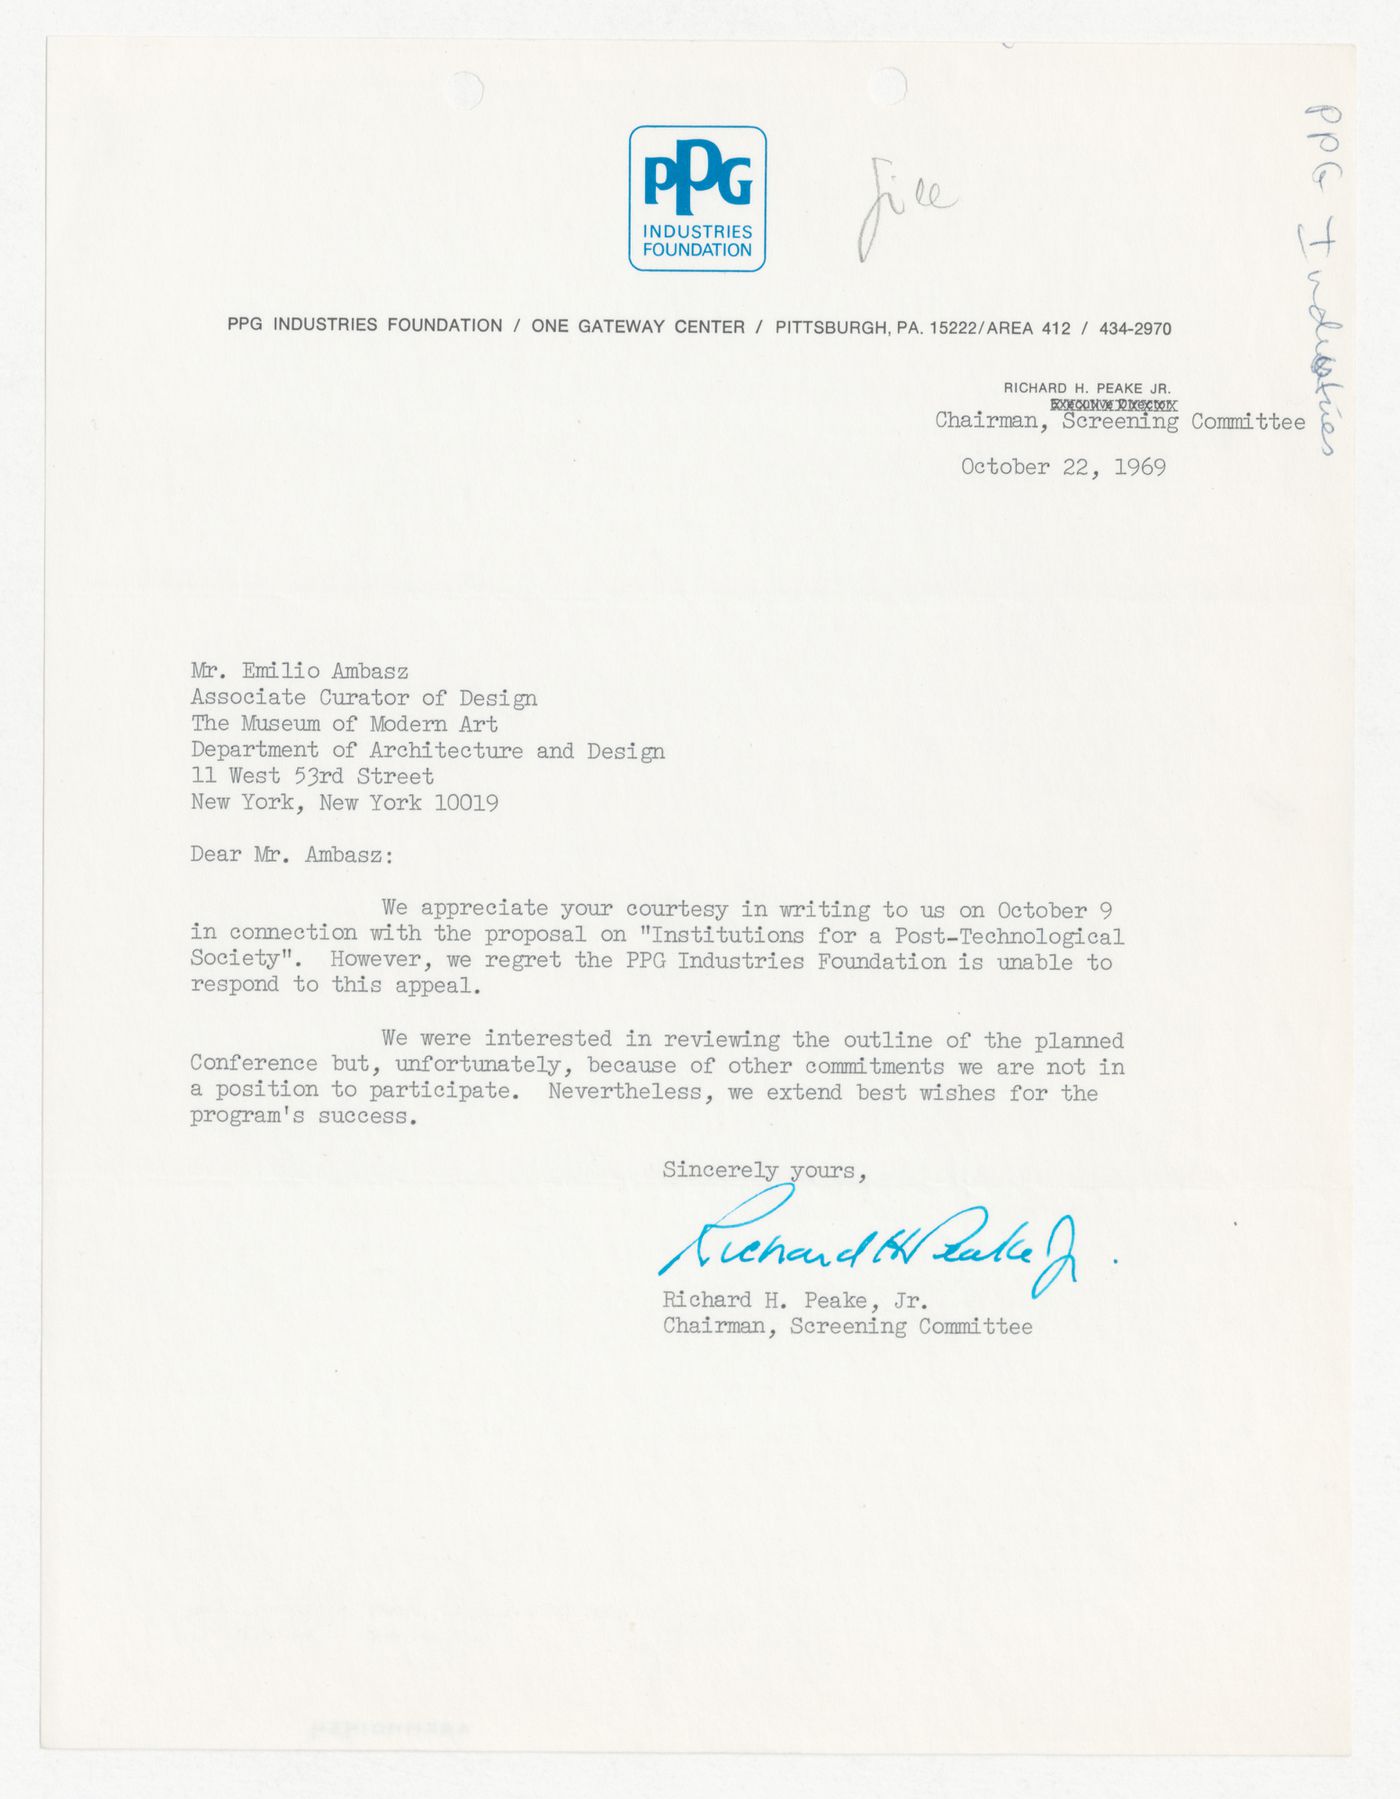 Letter from Richard H. Peake Jr. to Emilio Ambasz responding to proposal for Institutions for a Post-Technological Society conference